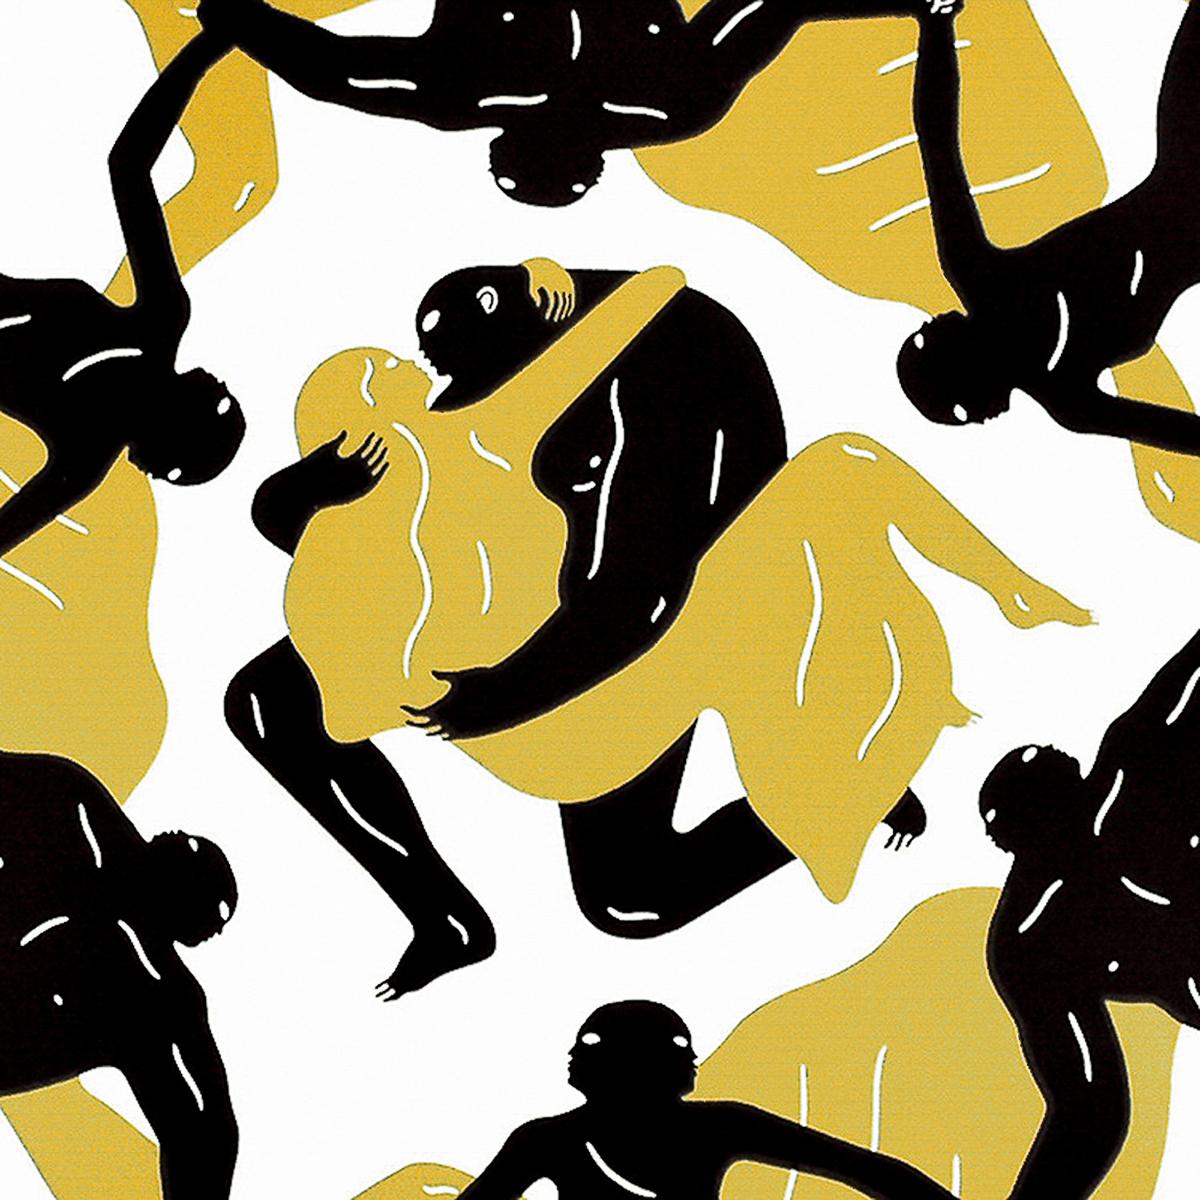 CLEON PETERSON Endless Sleep - Contemporary Print by Cleon Peterson